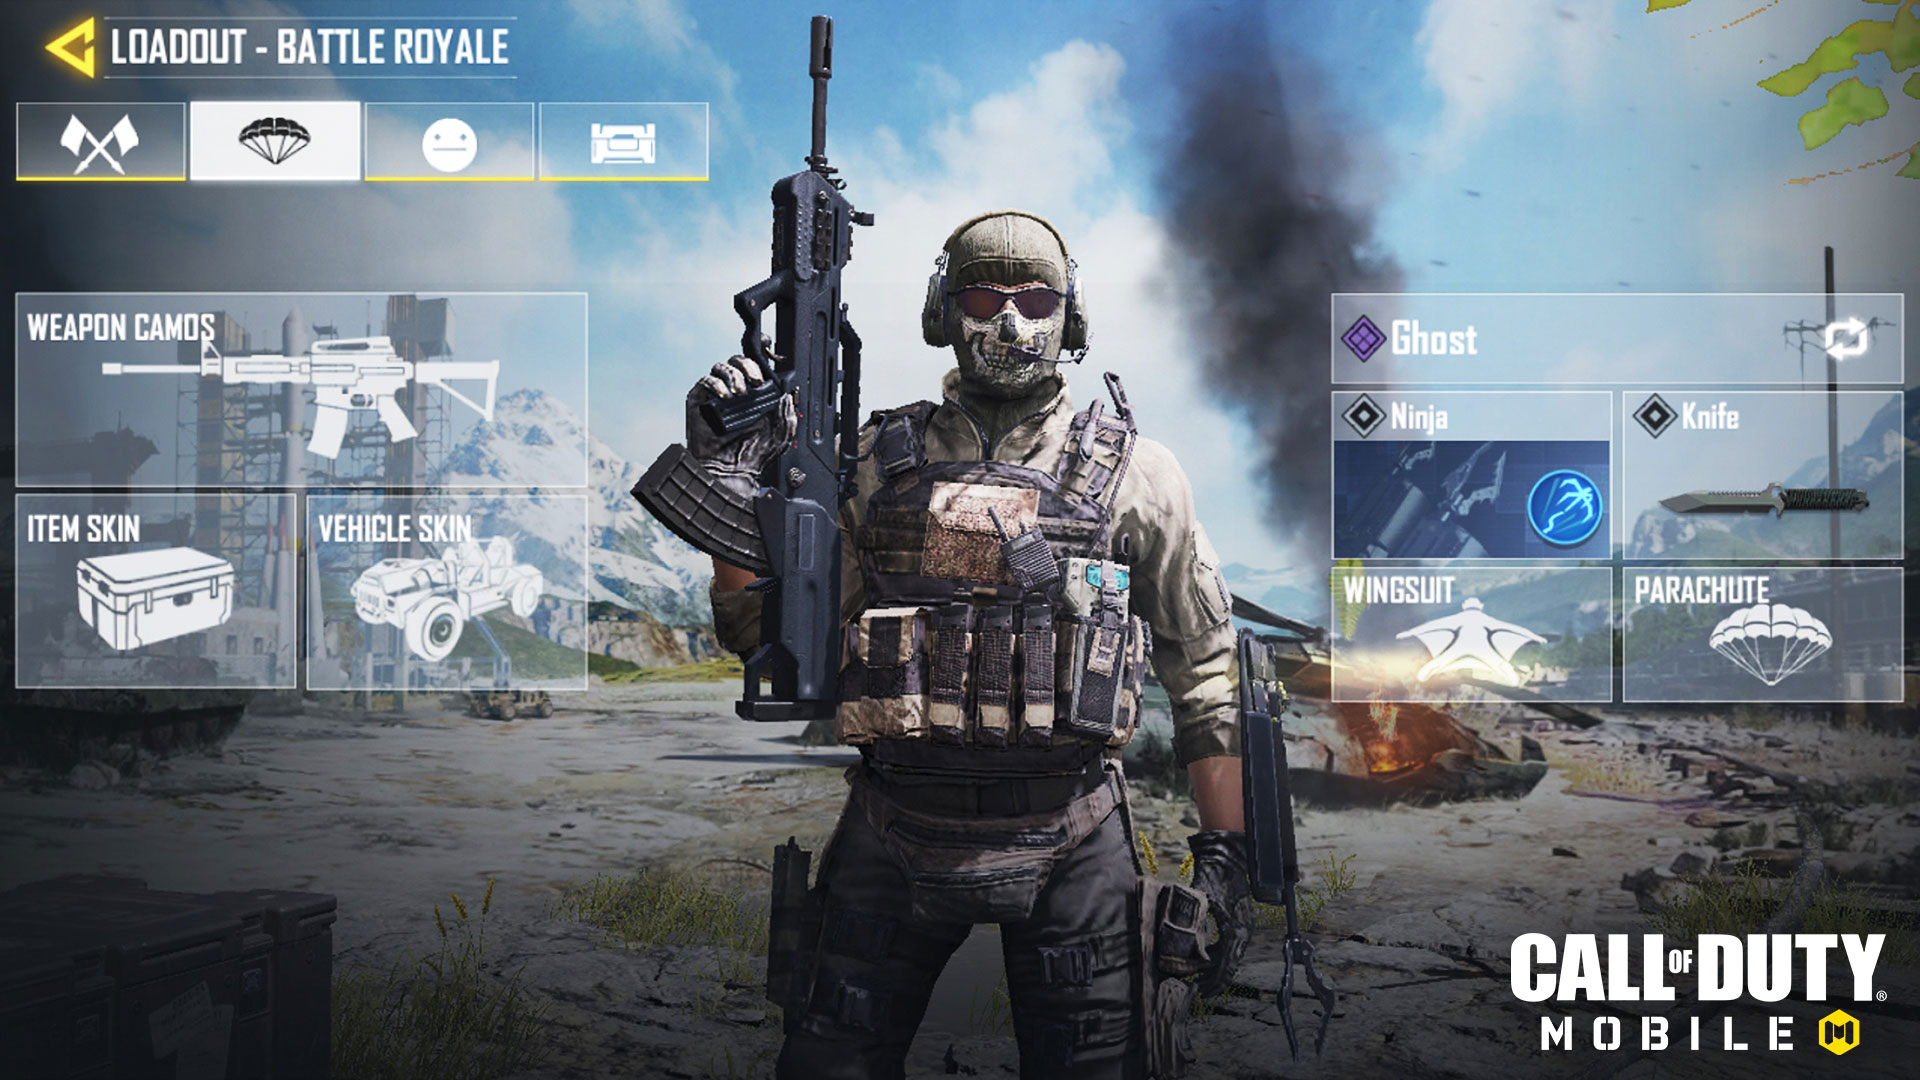 Call of Duty Warzone Mobile Might be a Reality, As Activision Job Listing  Suggests